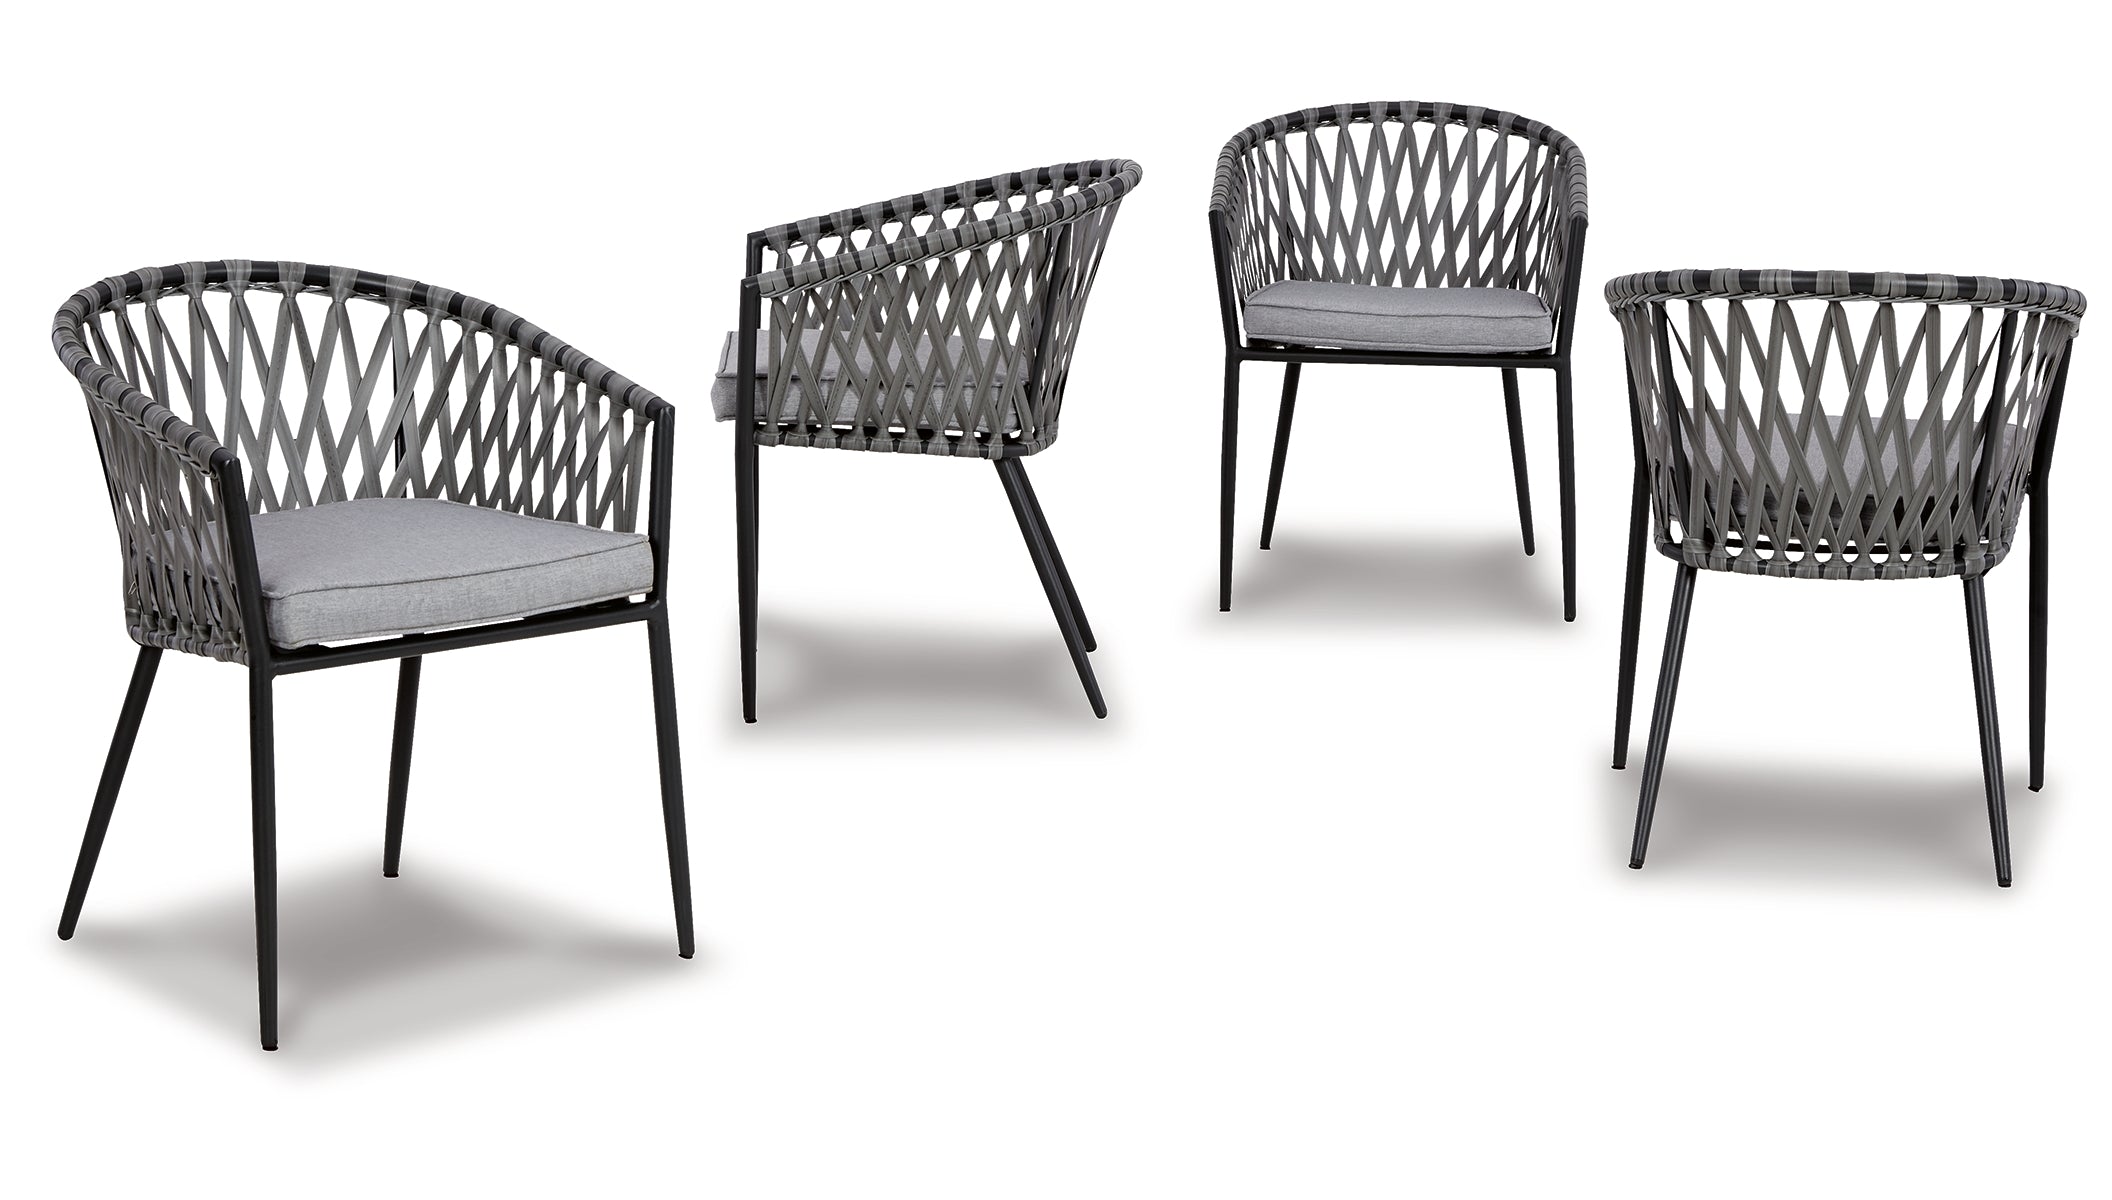 Palm Bliss Outdoor Dining Chair (Set of 4)